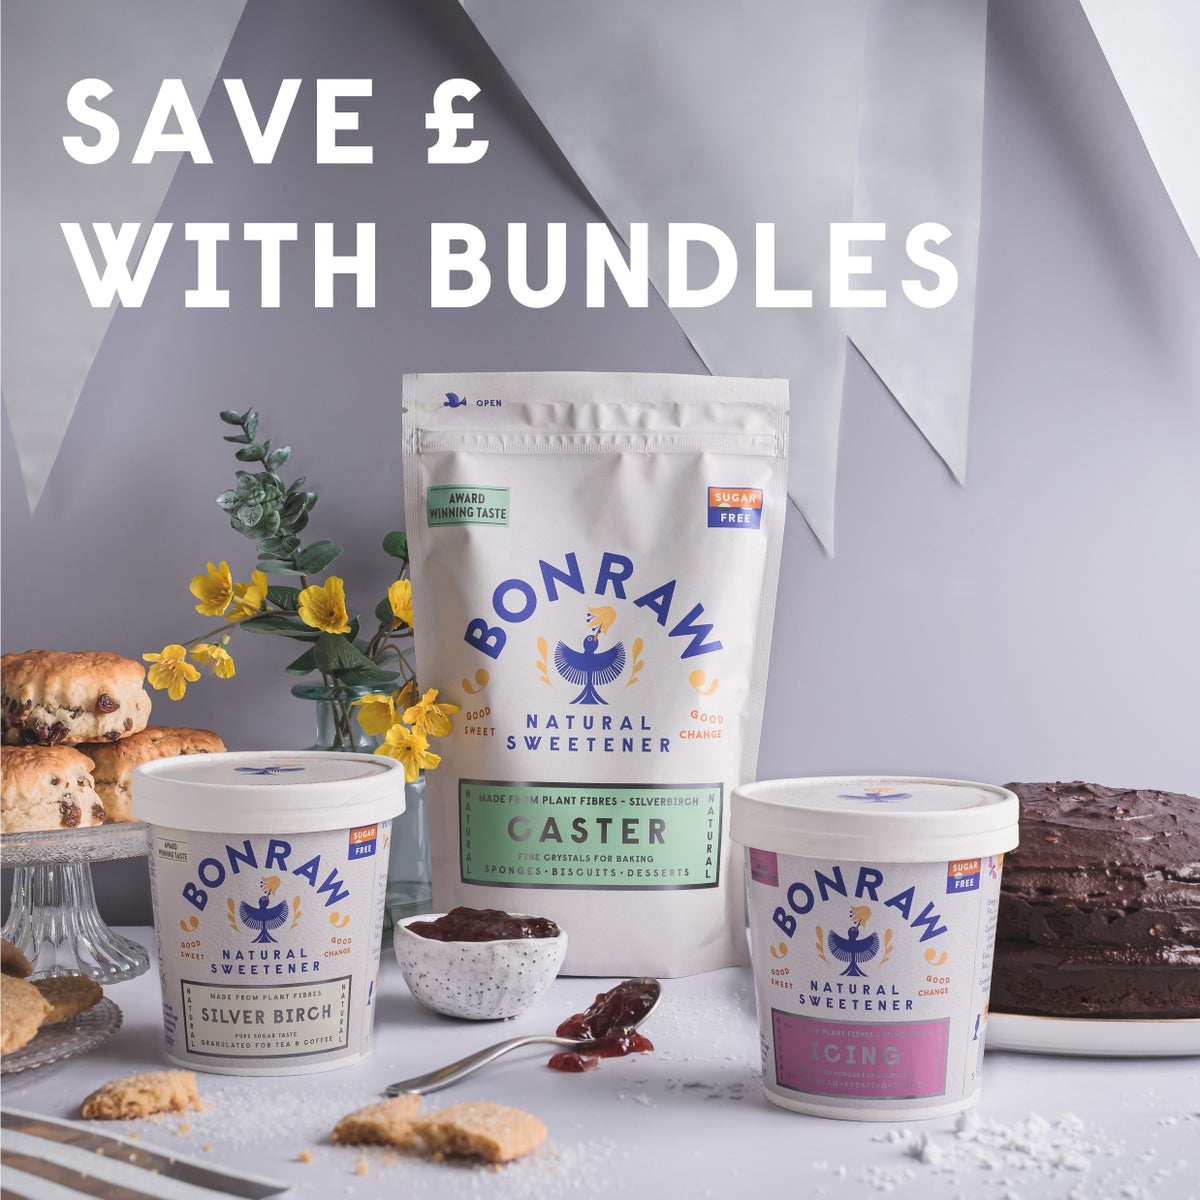 Save £ with bundles